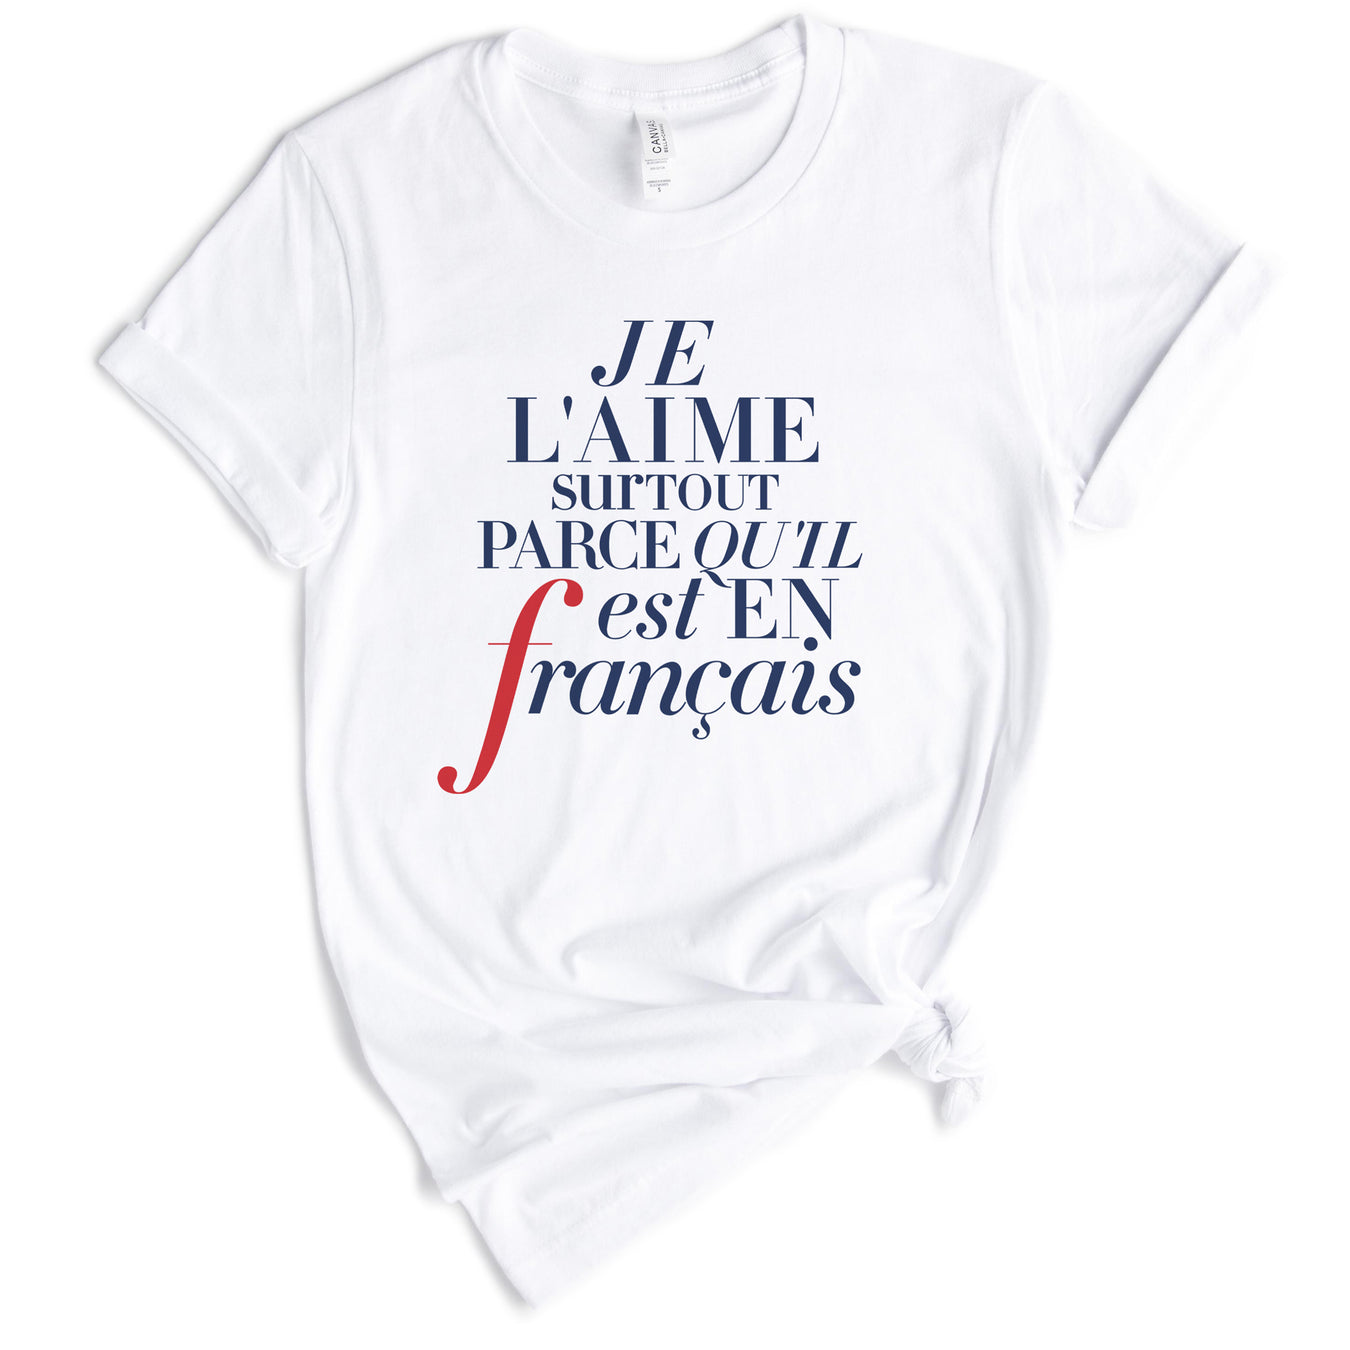 Better in French T-Shirts